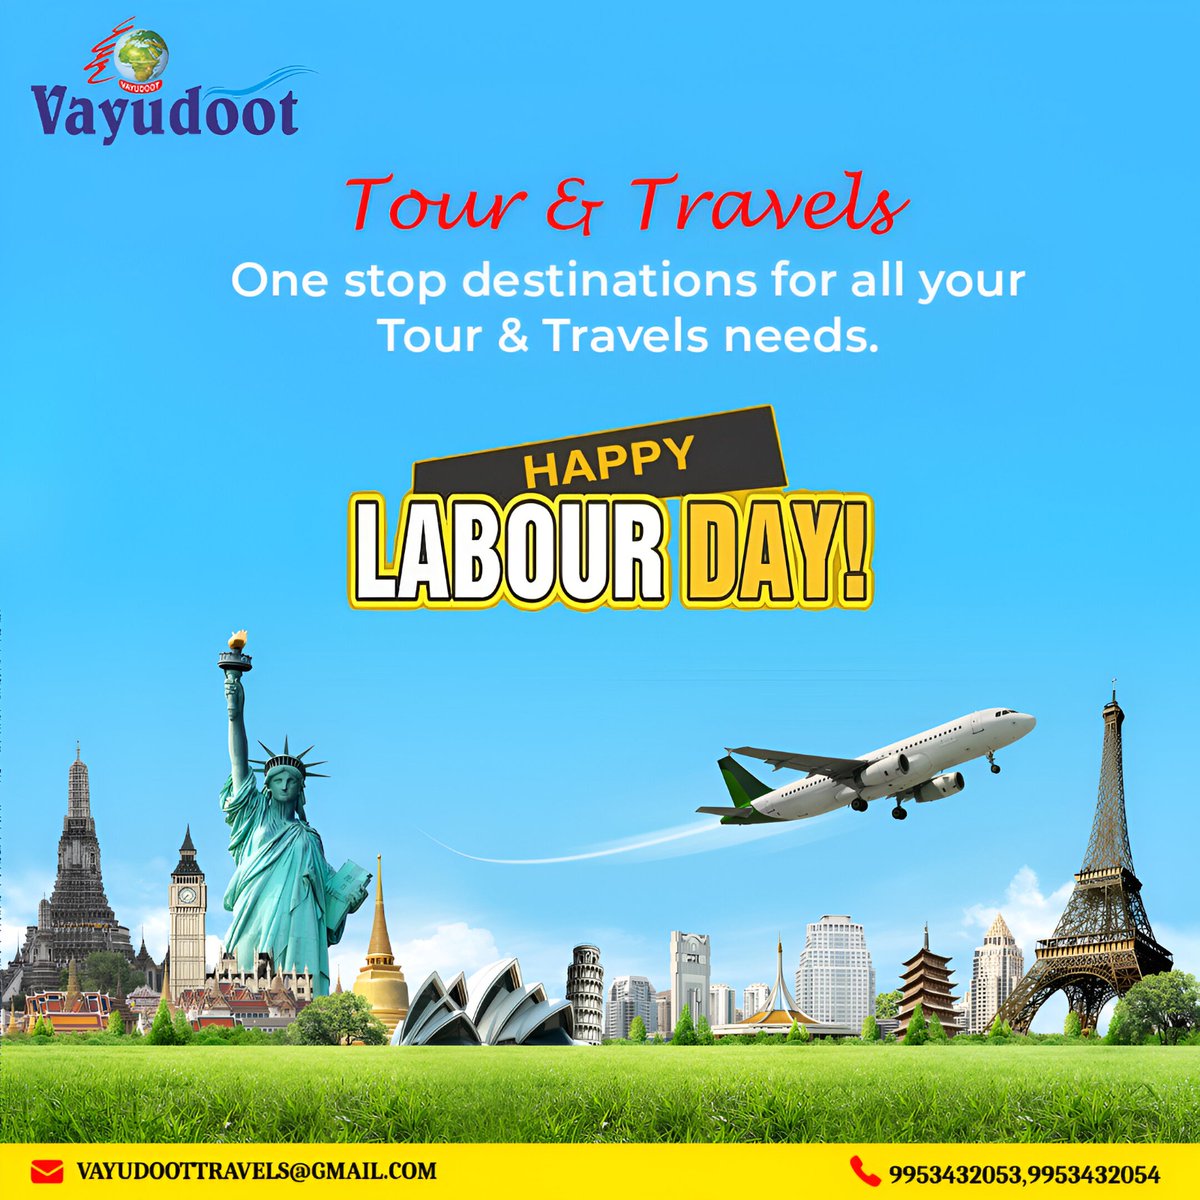 Celebrating Labour Day with Vayudoot Tour & Travels - your one stop destination for all your travel needs! 🌍✈️
.
.
.
#VayudootTravels #LabourDay2021 #TravelWithUs